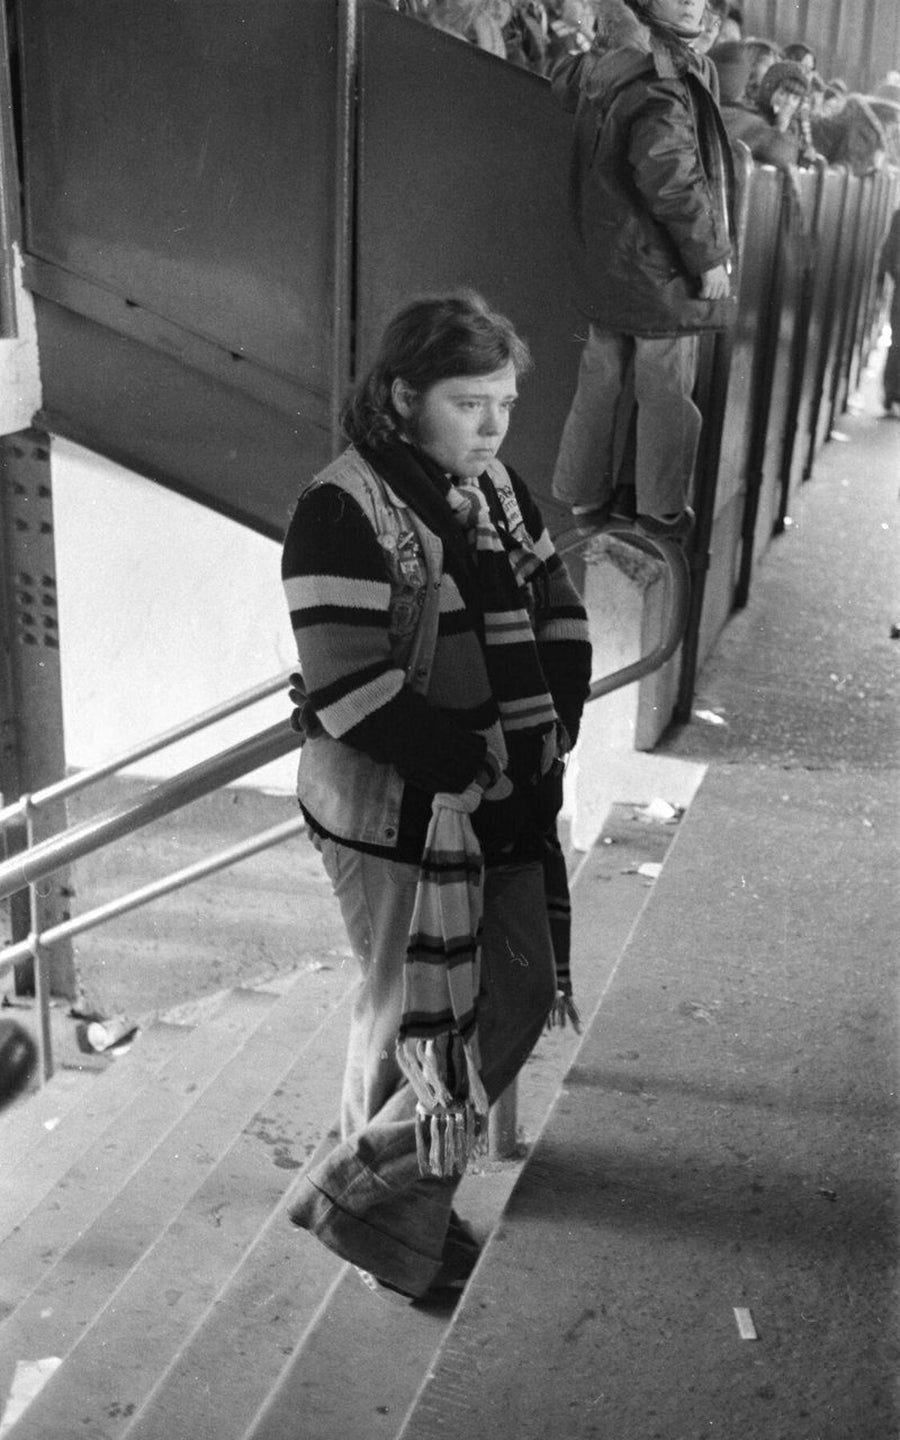 Manchester United Fan On The Stairs by Iain SP Reid - c. 1976